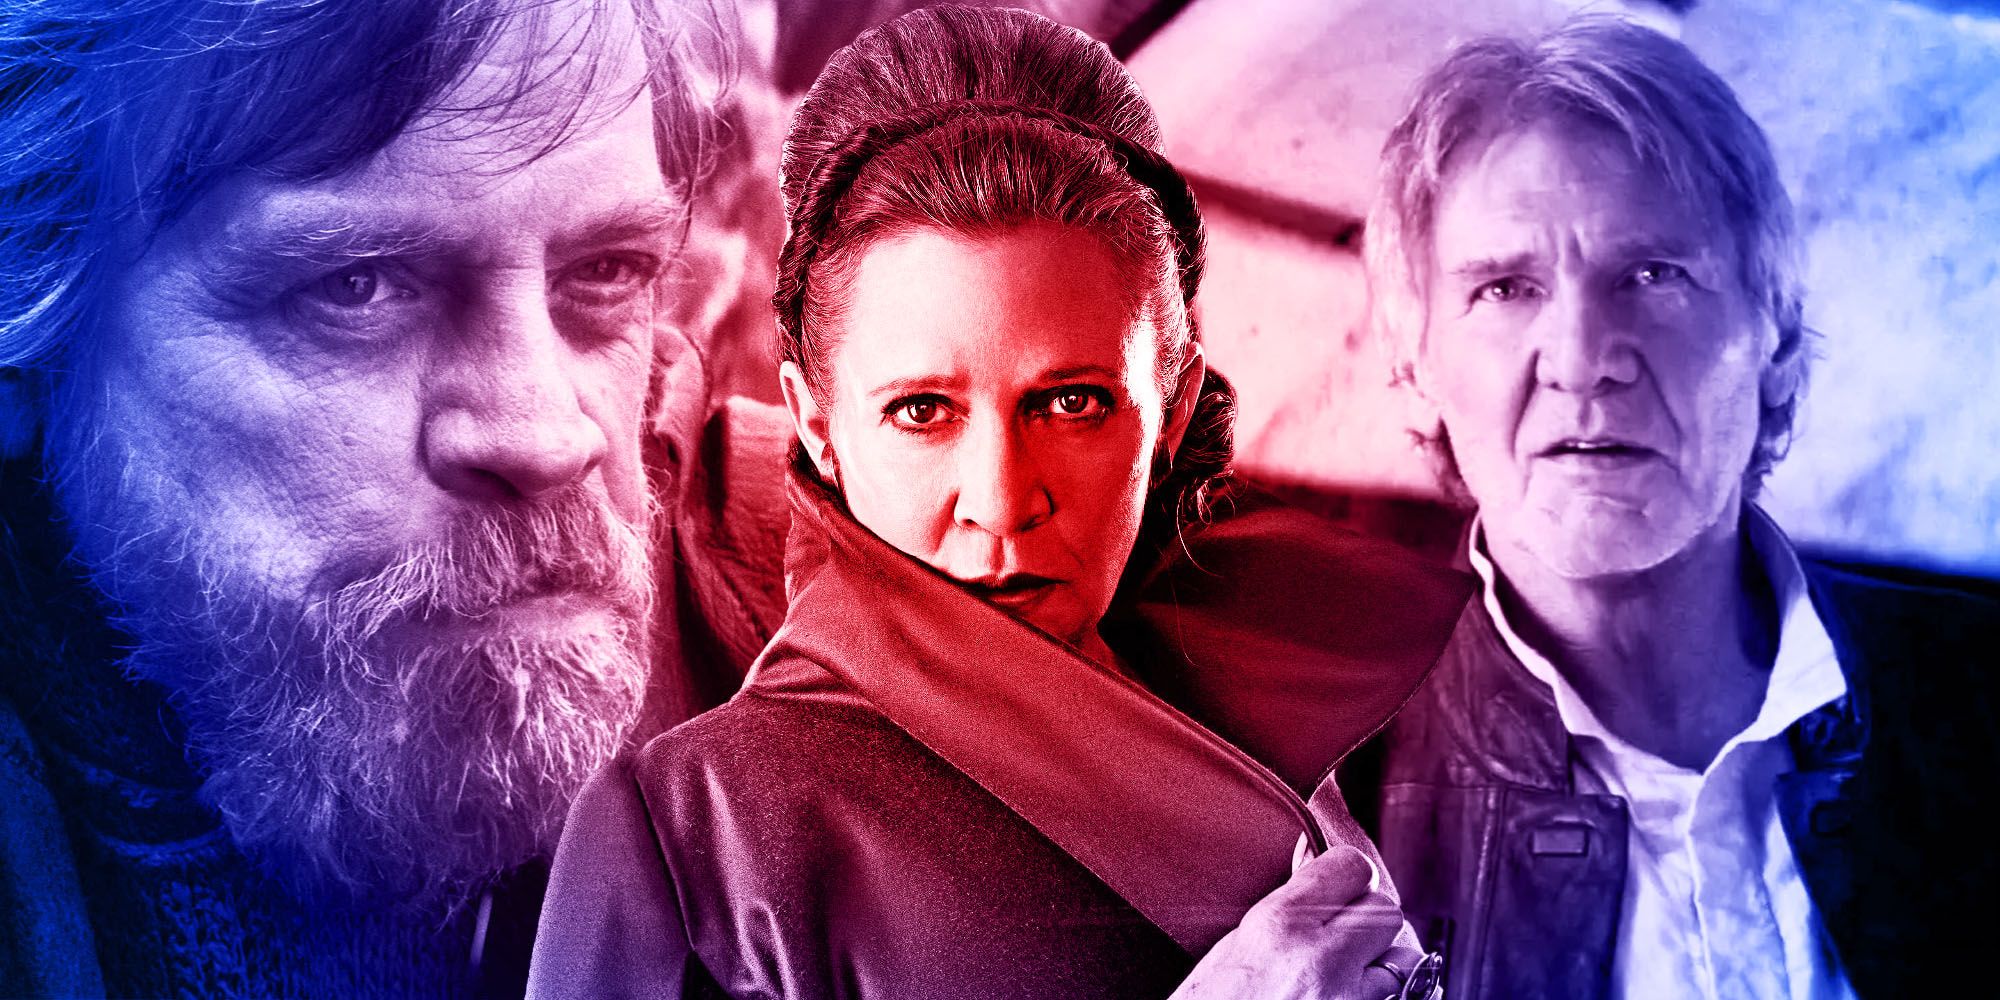 Luke Skywalker, Princess Leia, and Han Solo in the Star Wars sequels.